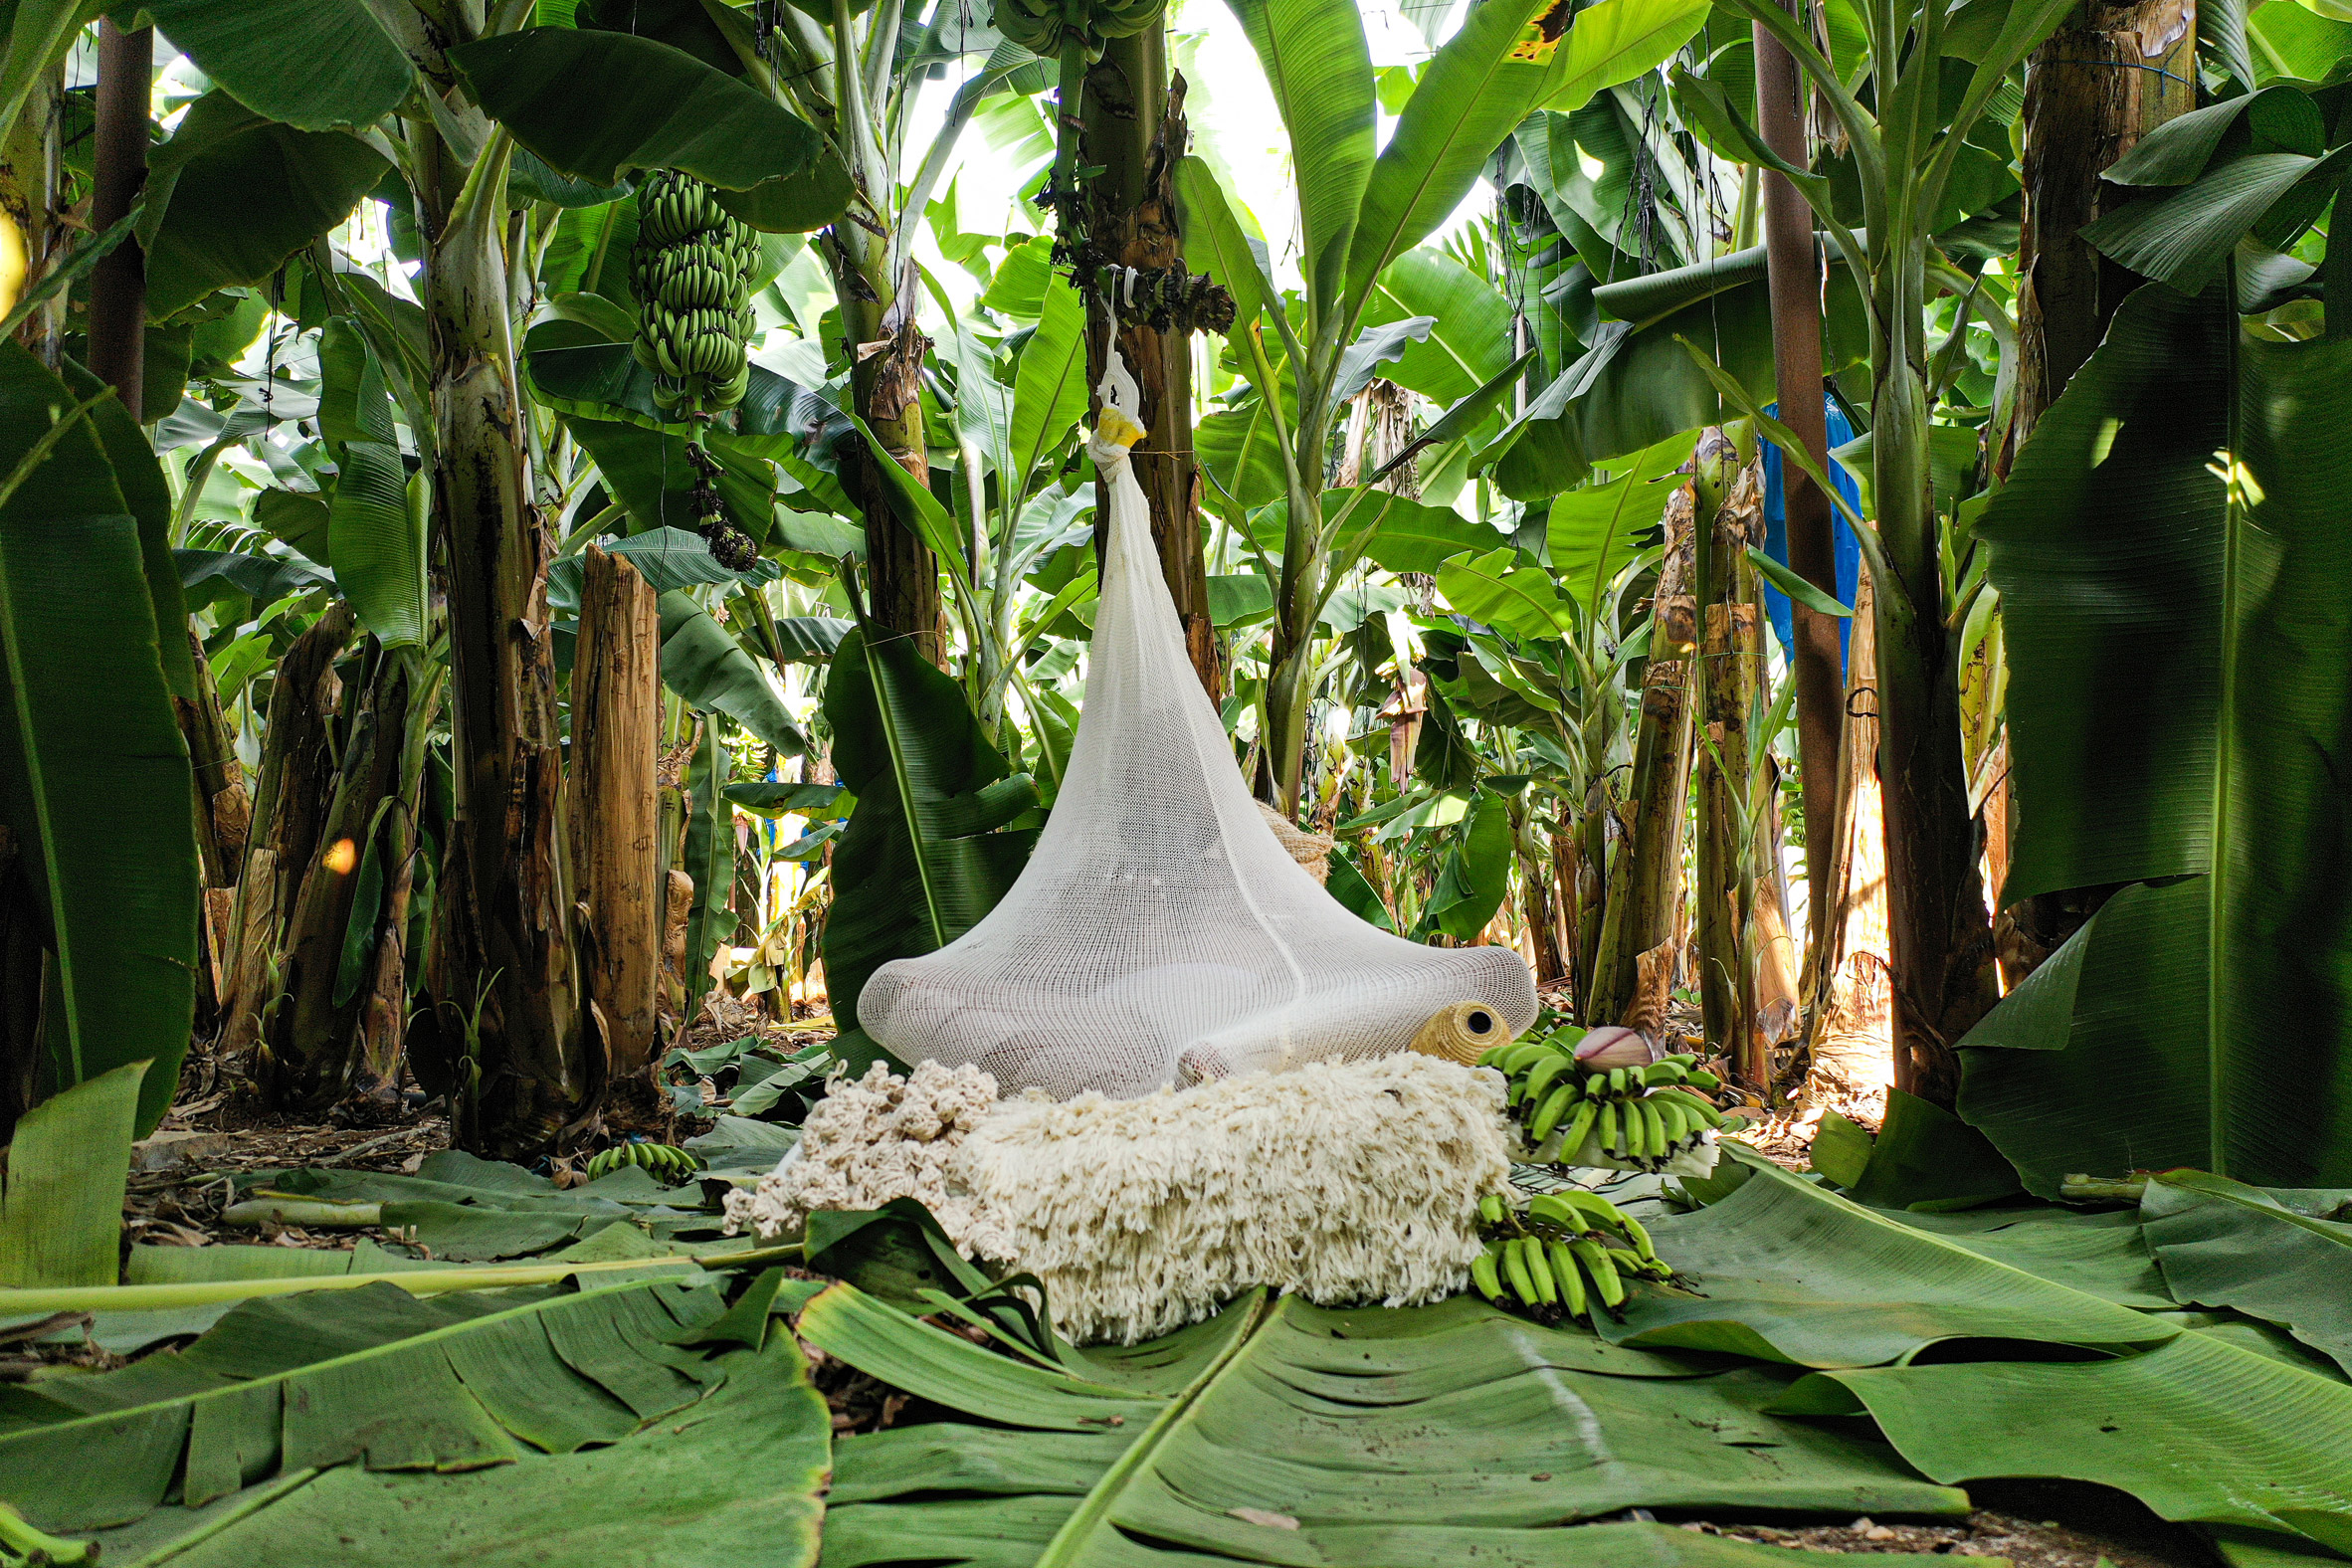 Erez Nevi Pana designs human "cocoons" from banana plants for Tropical Milan installation